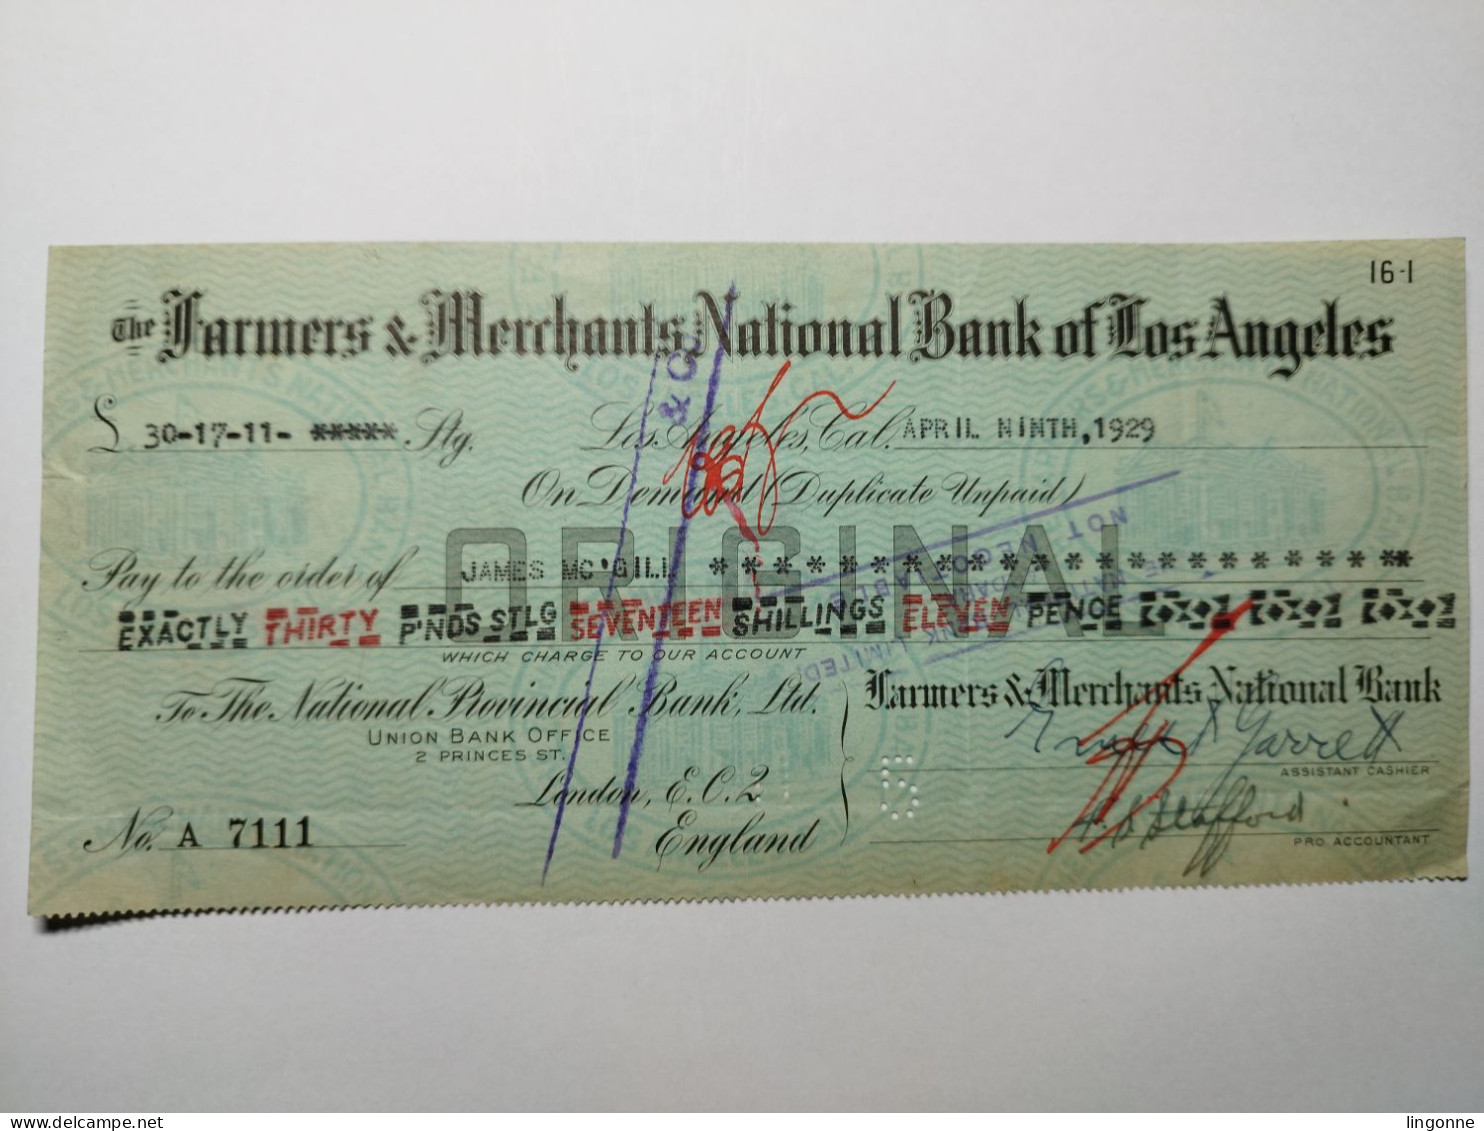 1929 The FARMERS & MERCHANTS NATIONAL BANK OF LOS ANGELES To The National Provincial Bank - EIRE 2 - USA